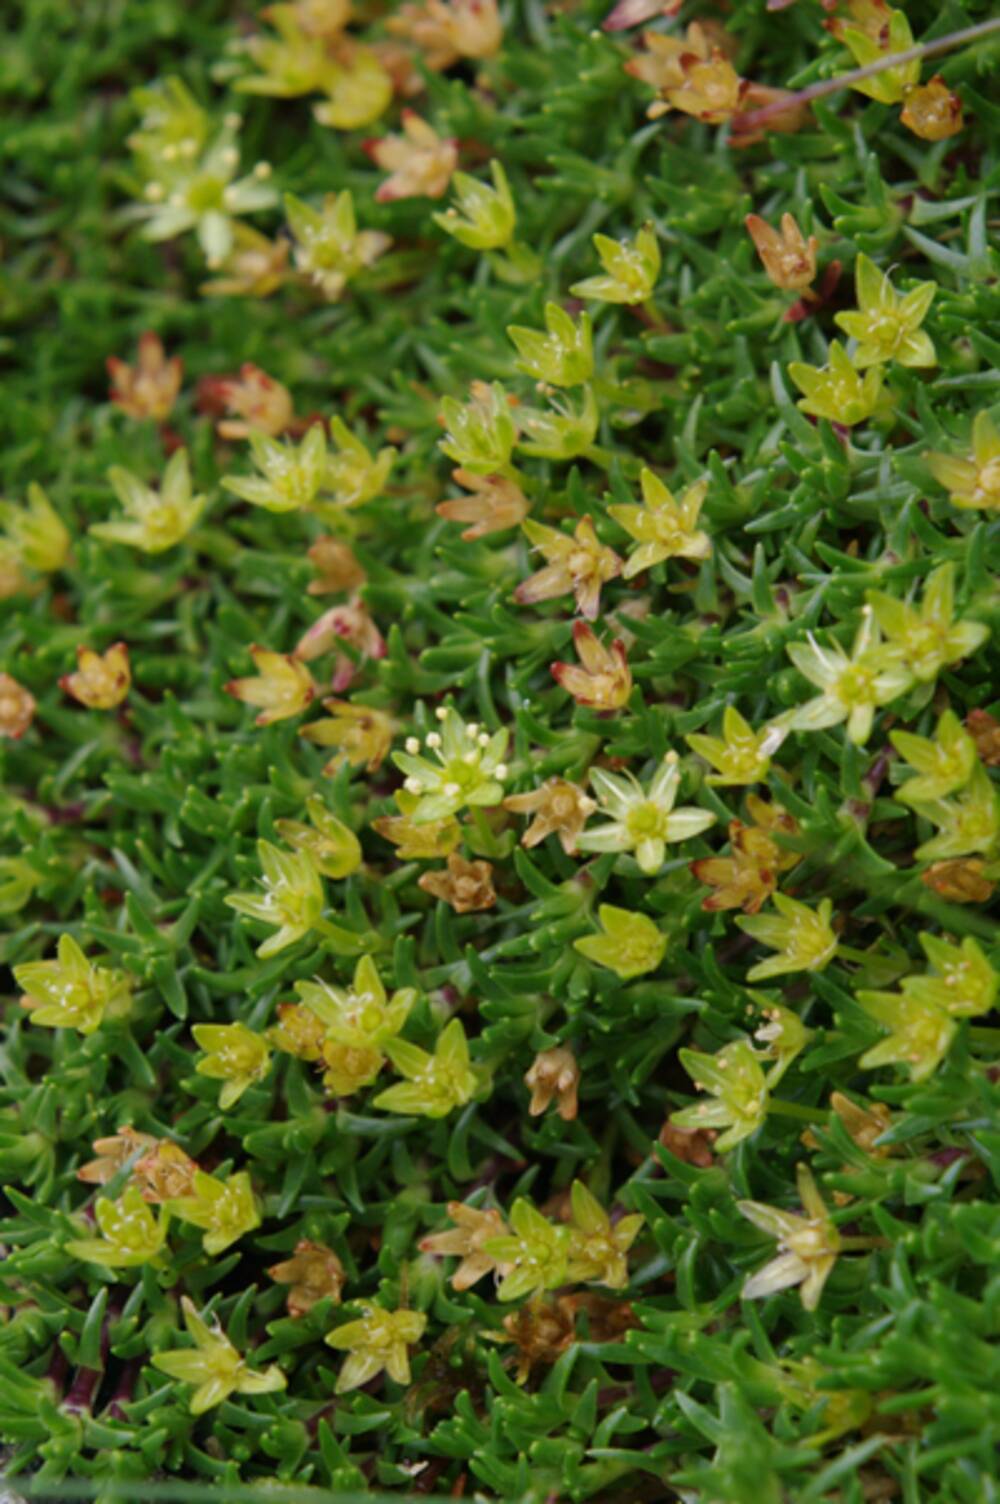 A close-up of a small yellow-flowered alpine plant.